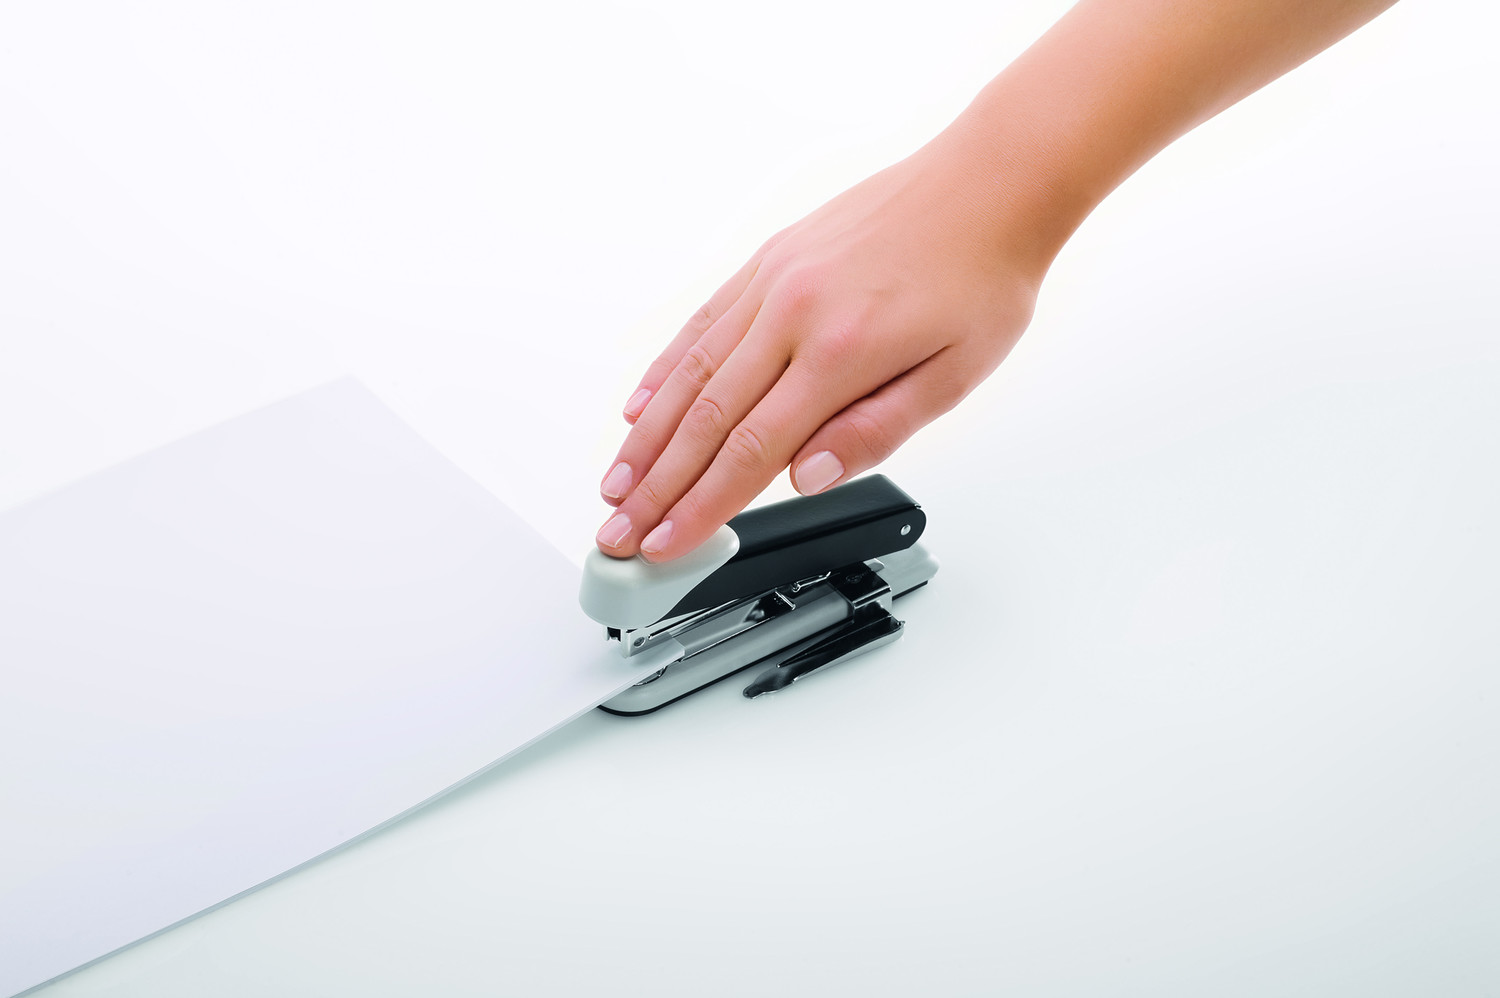 More options: Coming with three stapling methods, working with the NOVUS STABIL couldn't be more flexible - permanent stapling, temporary stapling for keeping papers together over short periods, and nailing for conveniently posting notices or photos on a pin board for instance.